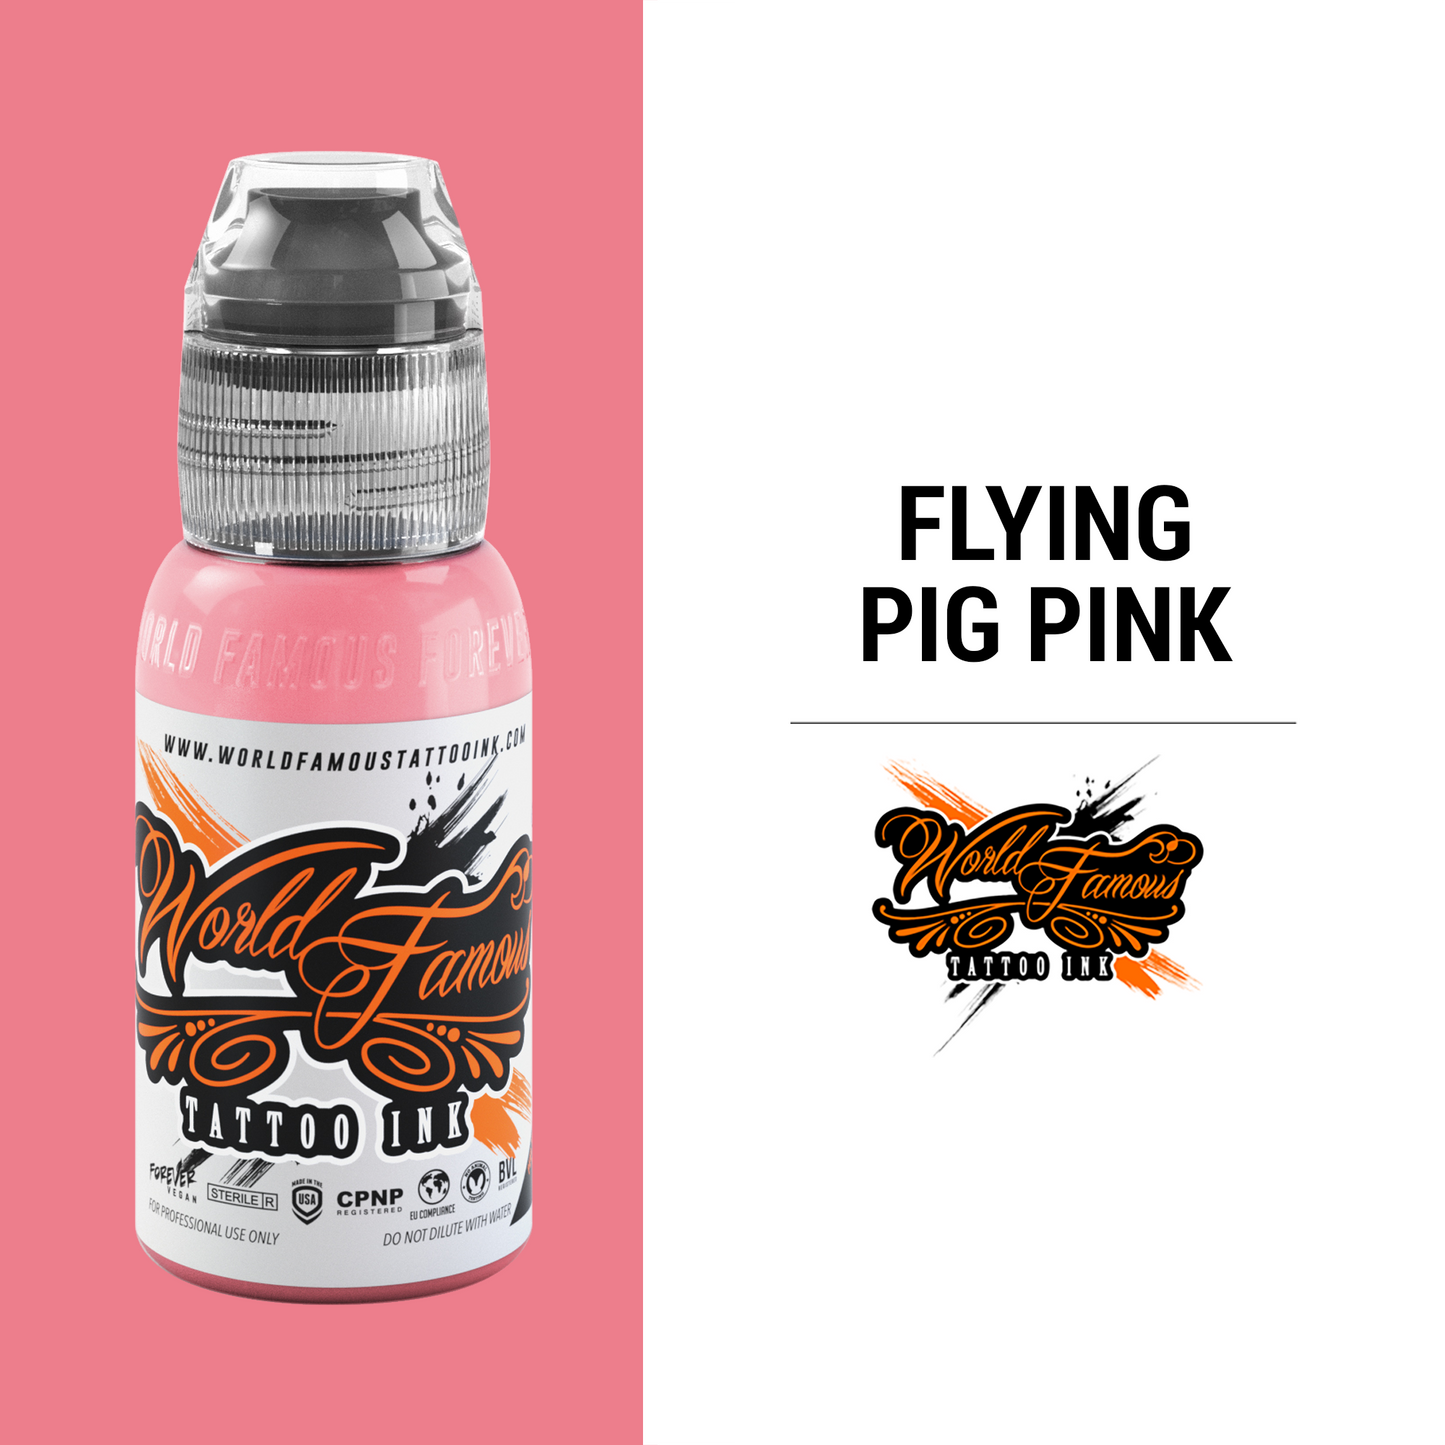 Flying Pig Pink | World Famous Tattoo Ink